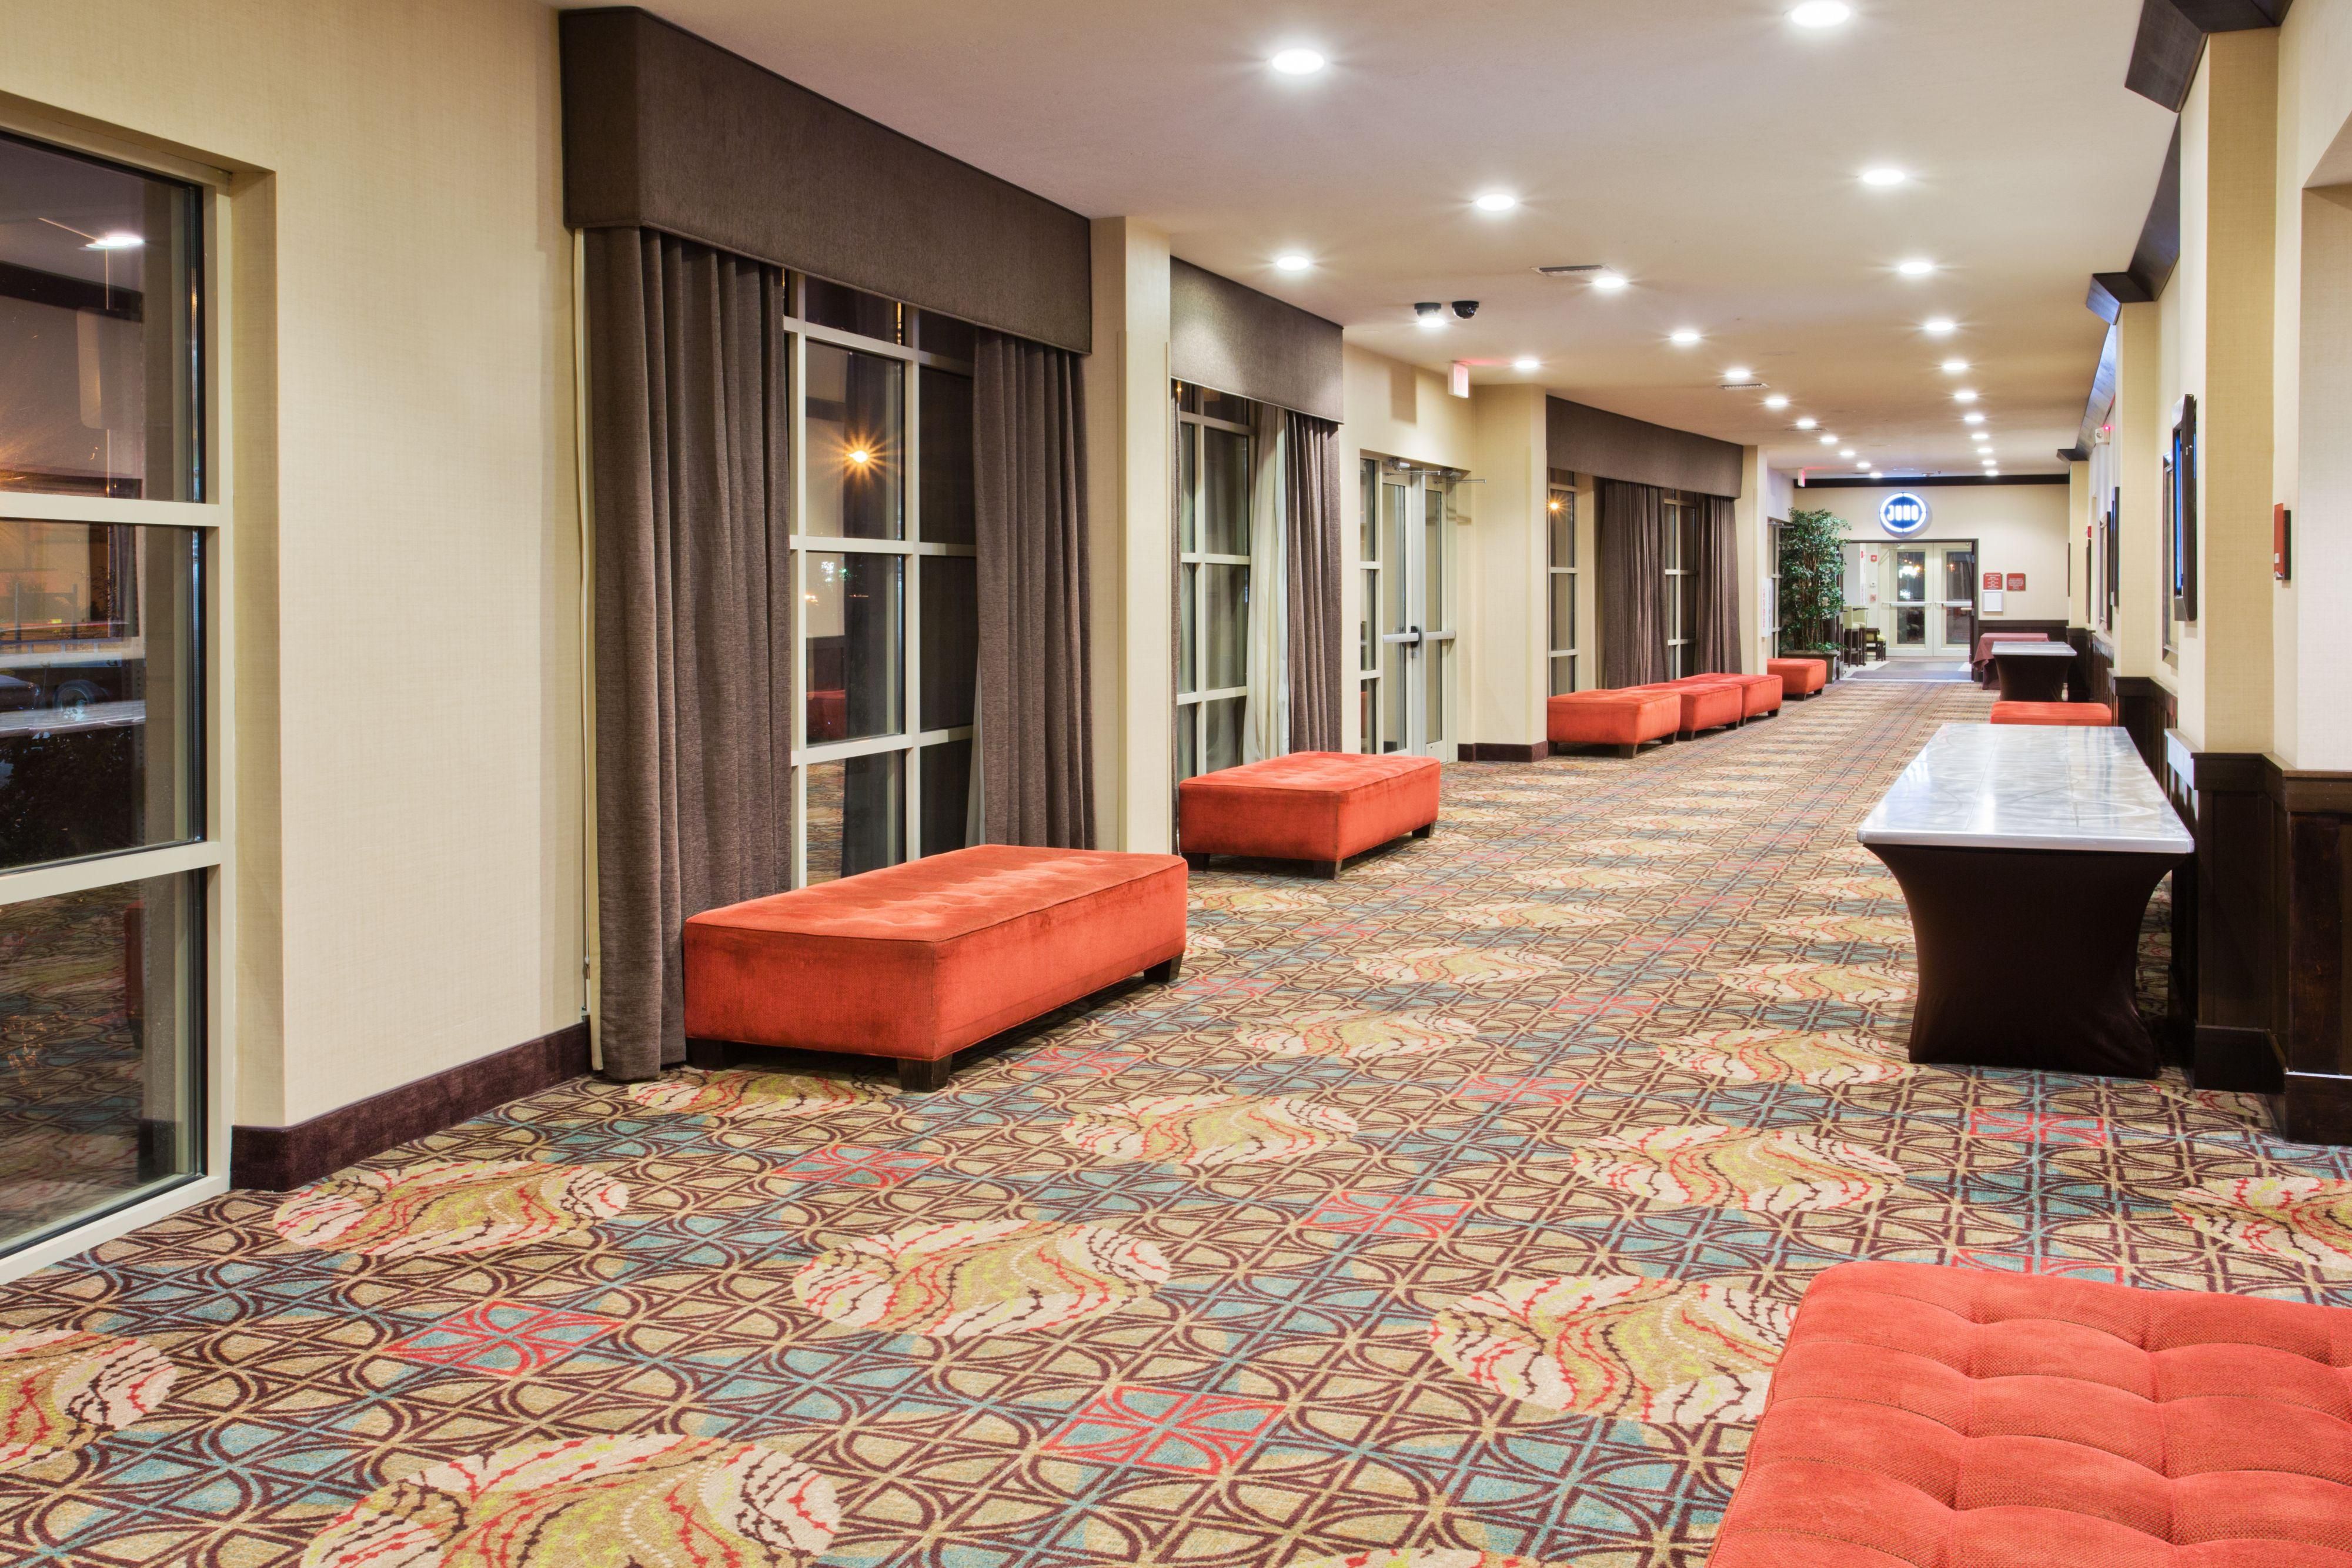 Our spacious pre-function area is perfect for a breakfast buffet